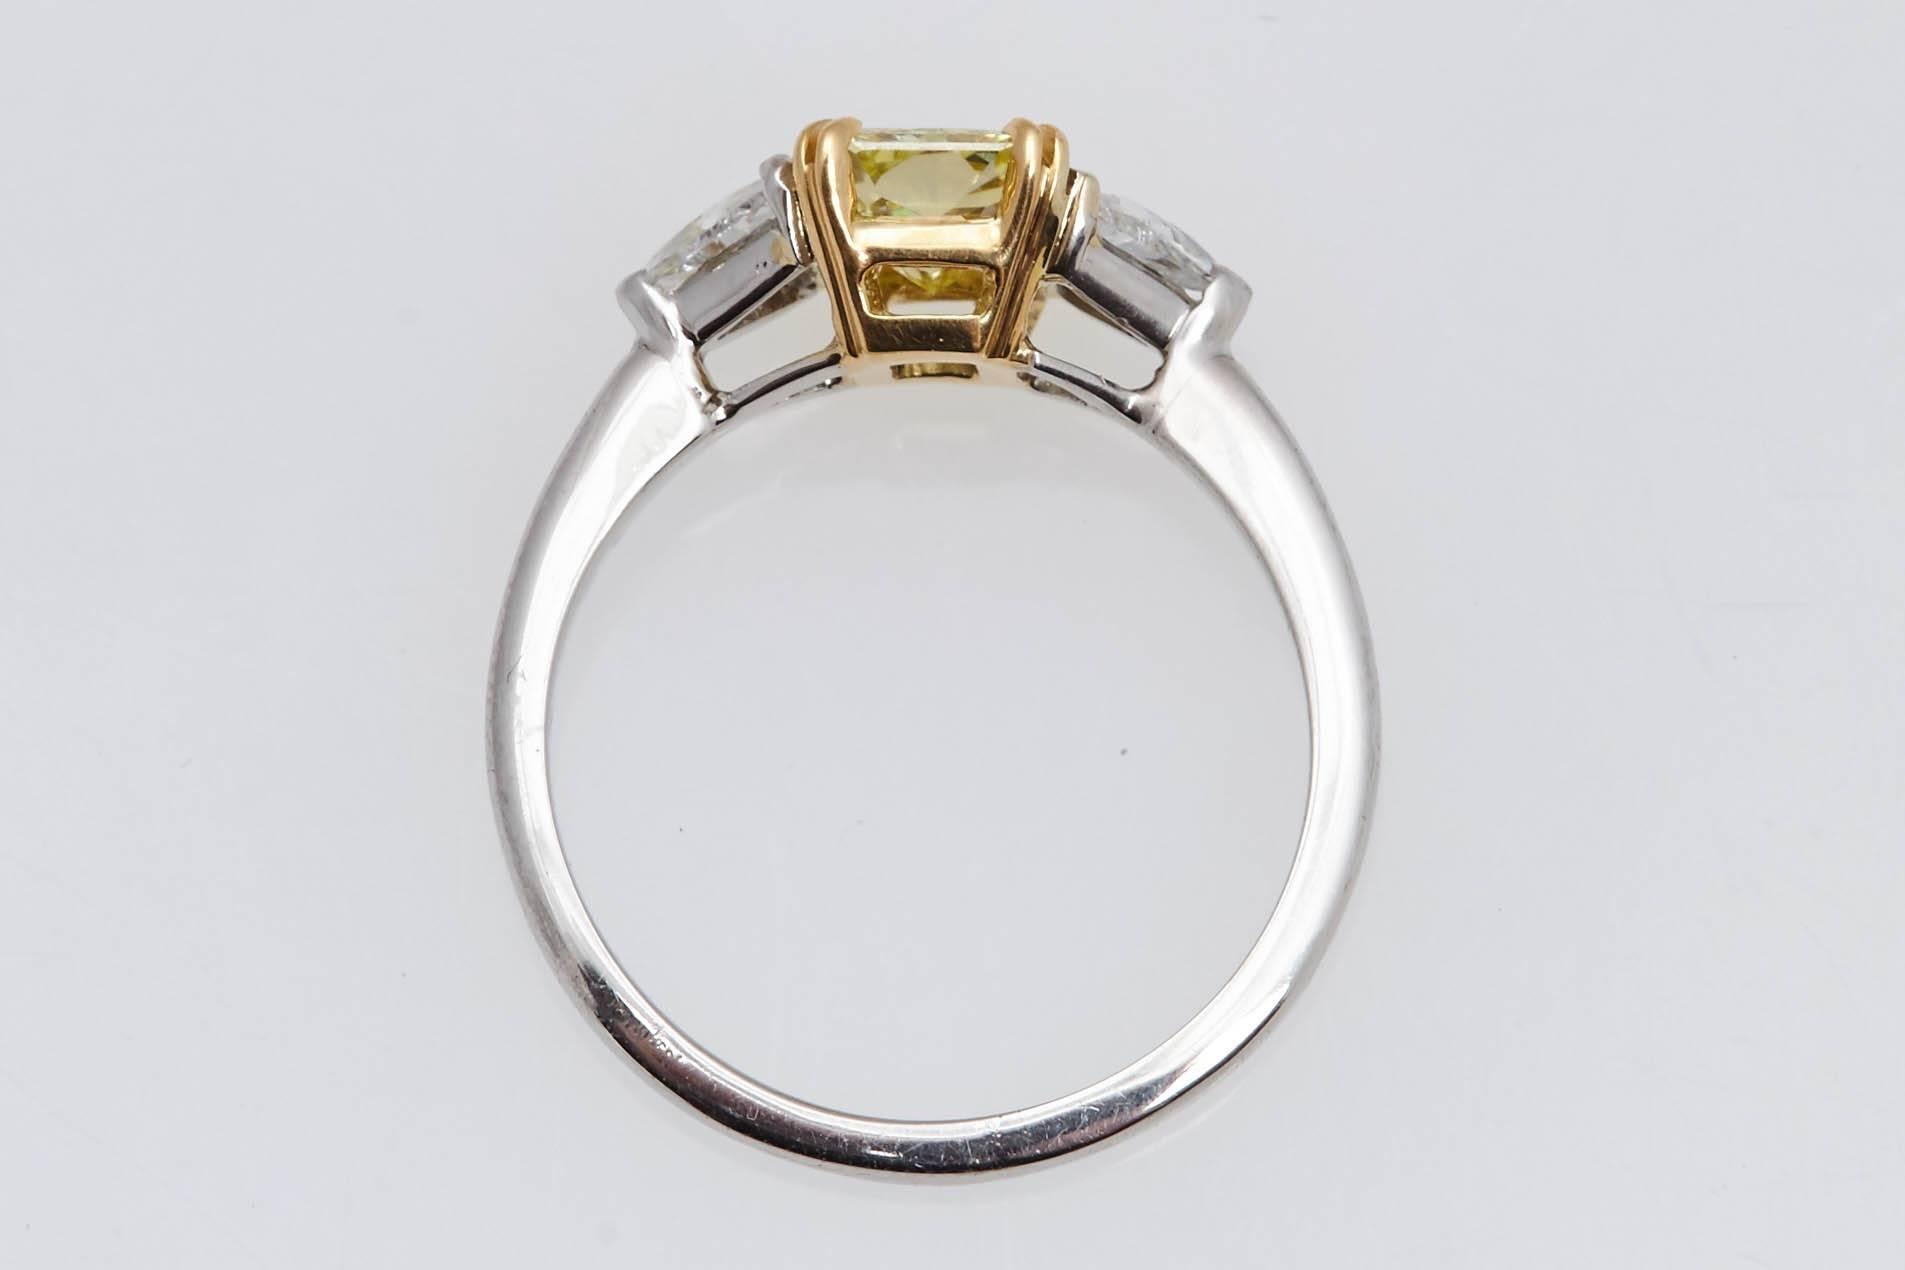 Classic platinum and eighteen karat yellow gold ring with a radiant cut diamond in the center weighing .97 carat. The ring has two trillion shaped diamonds on the side with an approximate weight of .60 carat. The center diamond has a report from the